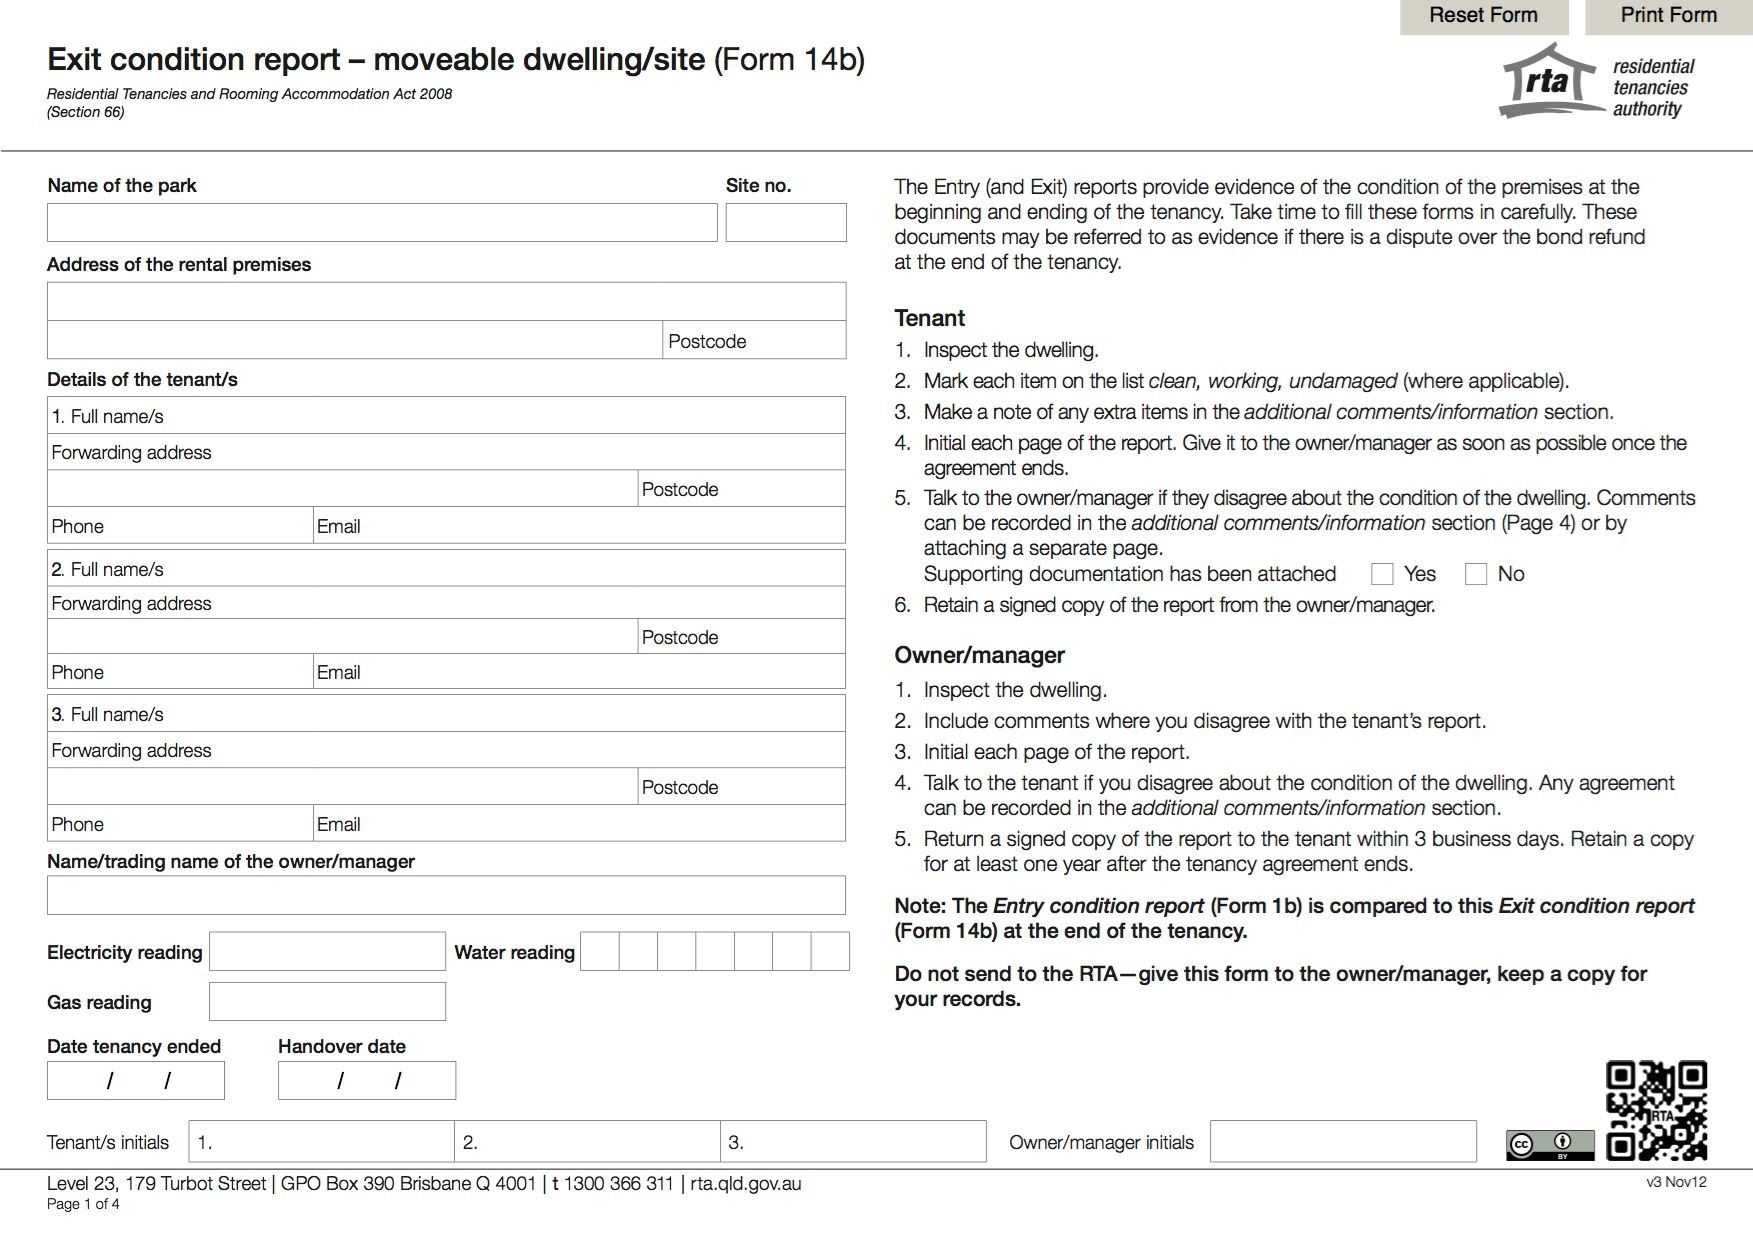 Incident Report Form Template Qld ] - Michael Smith News 17 Inside Incident Report Form Template Qld